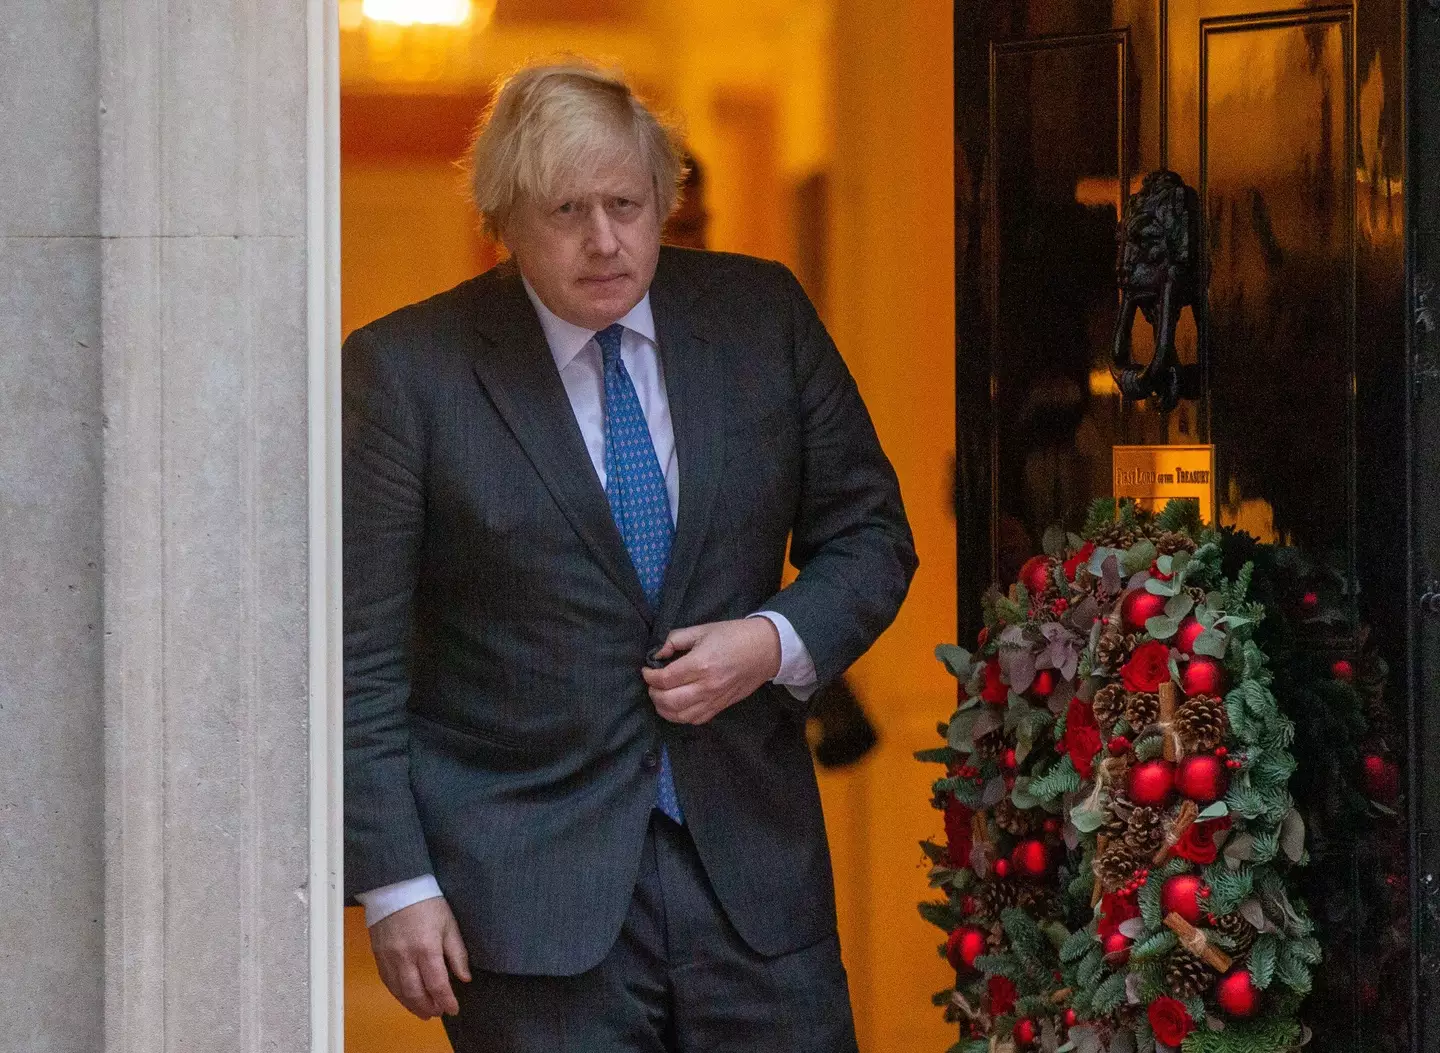 Johnson has announced that there will be no new Covid measures in England before Christmas.